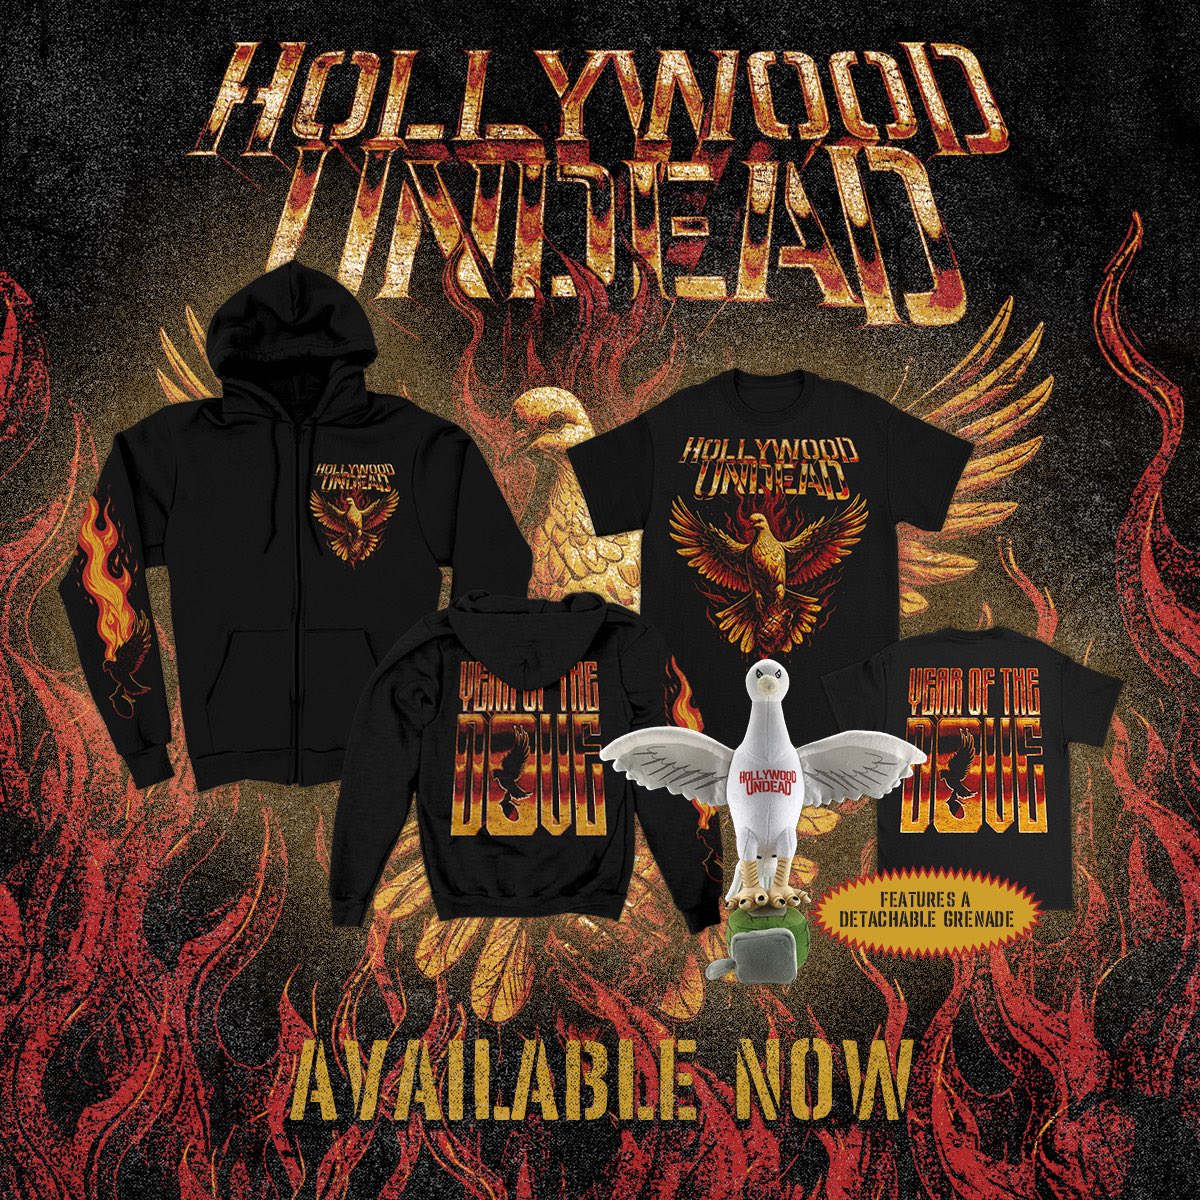 It’s our year, Undead Army 🫡 Year of The Dove merch collection available now! 🕊 SHOP NOW AT store.hollywoodundead.com